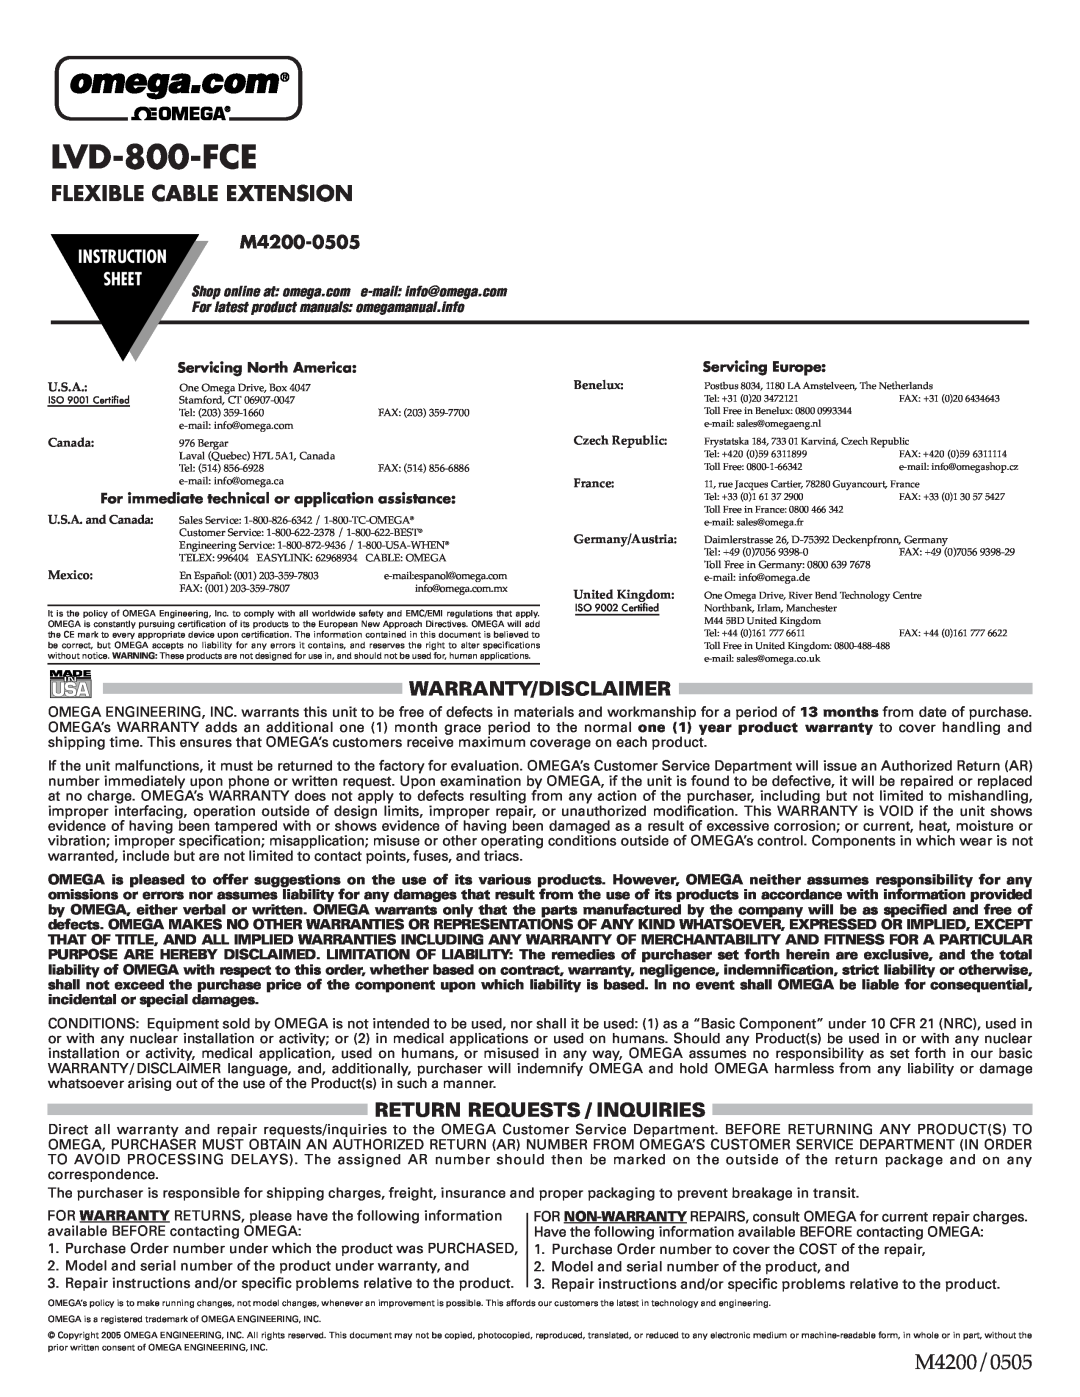 Omega Engineering LVD-800-FCE instruction sheet Flexible Cable Extension, Warranty/Disclaimer, Return Requests / Inquiries 